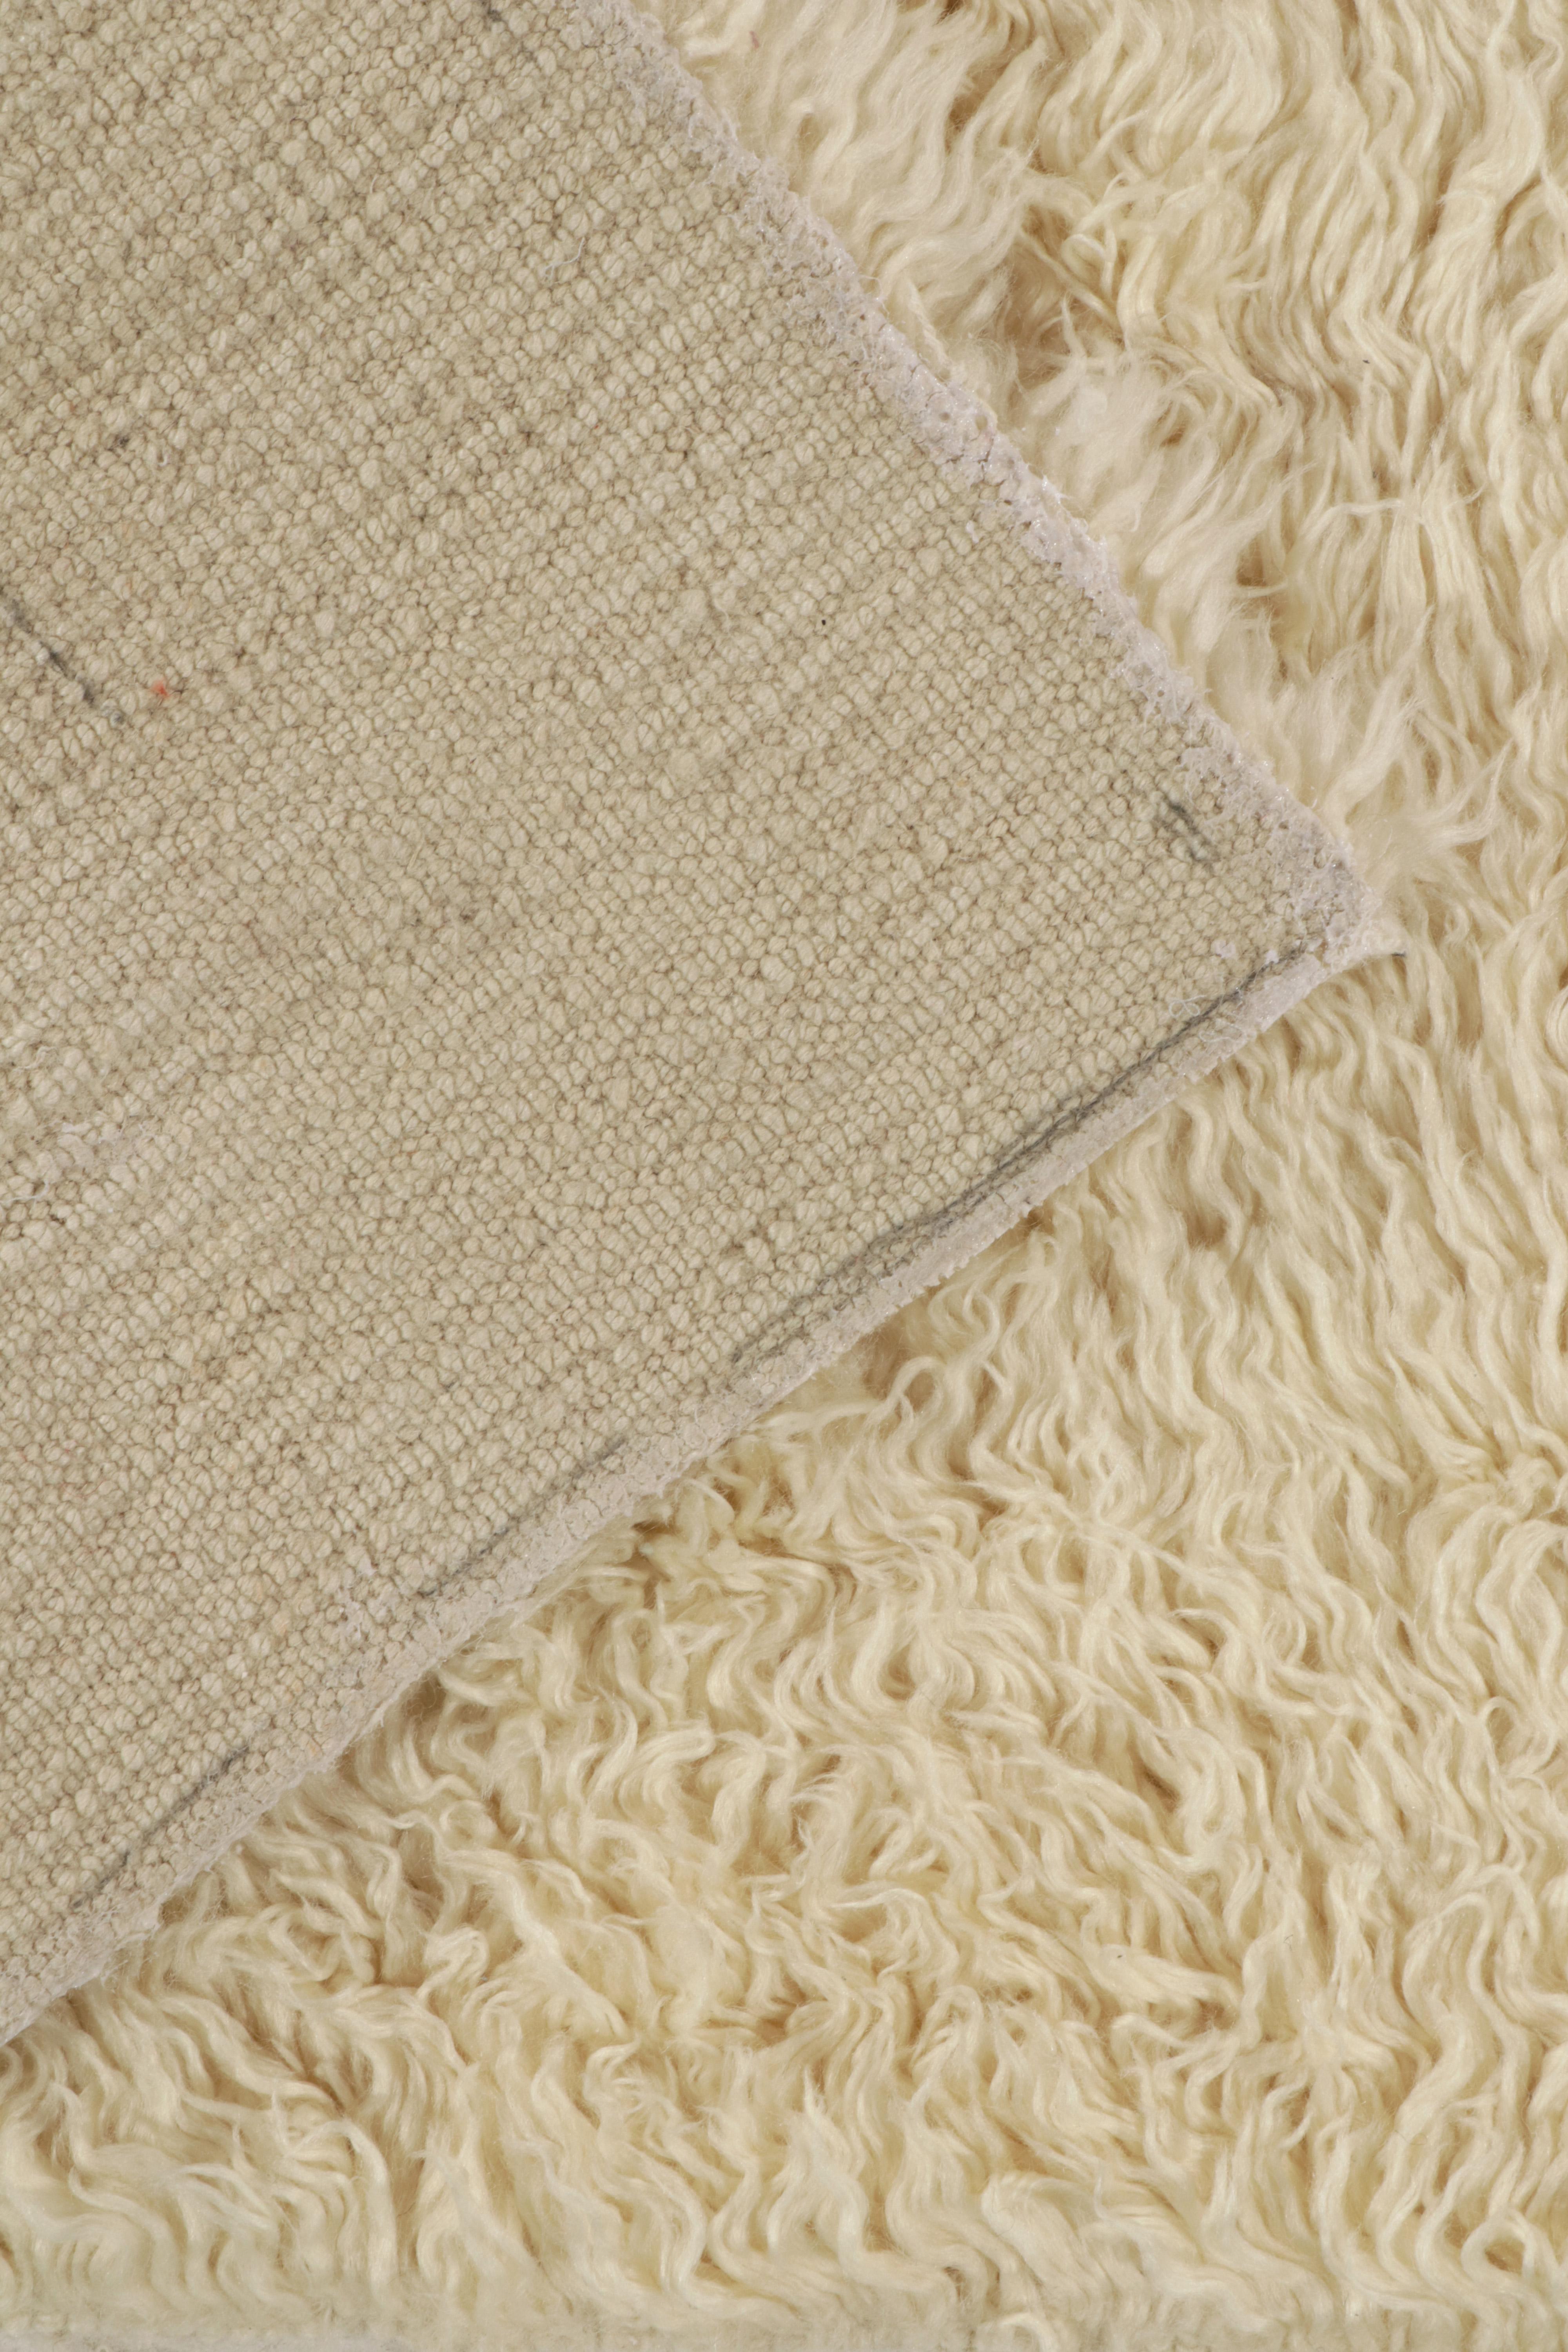 Contemporary Rug & Kilim’s Moroccan Style Shag Rug in Creamy High-Pile For Sale